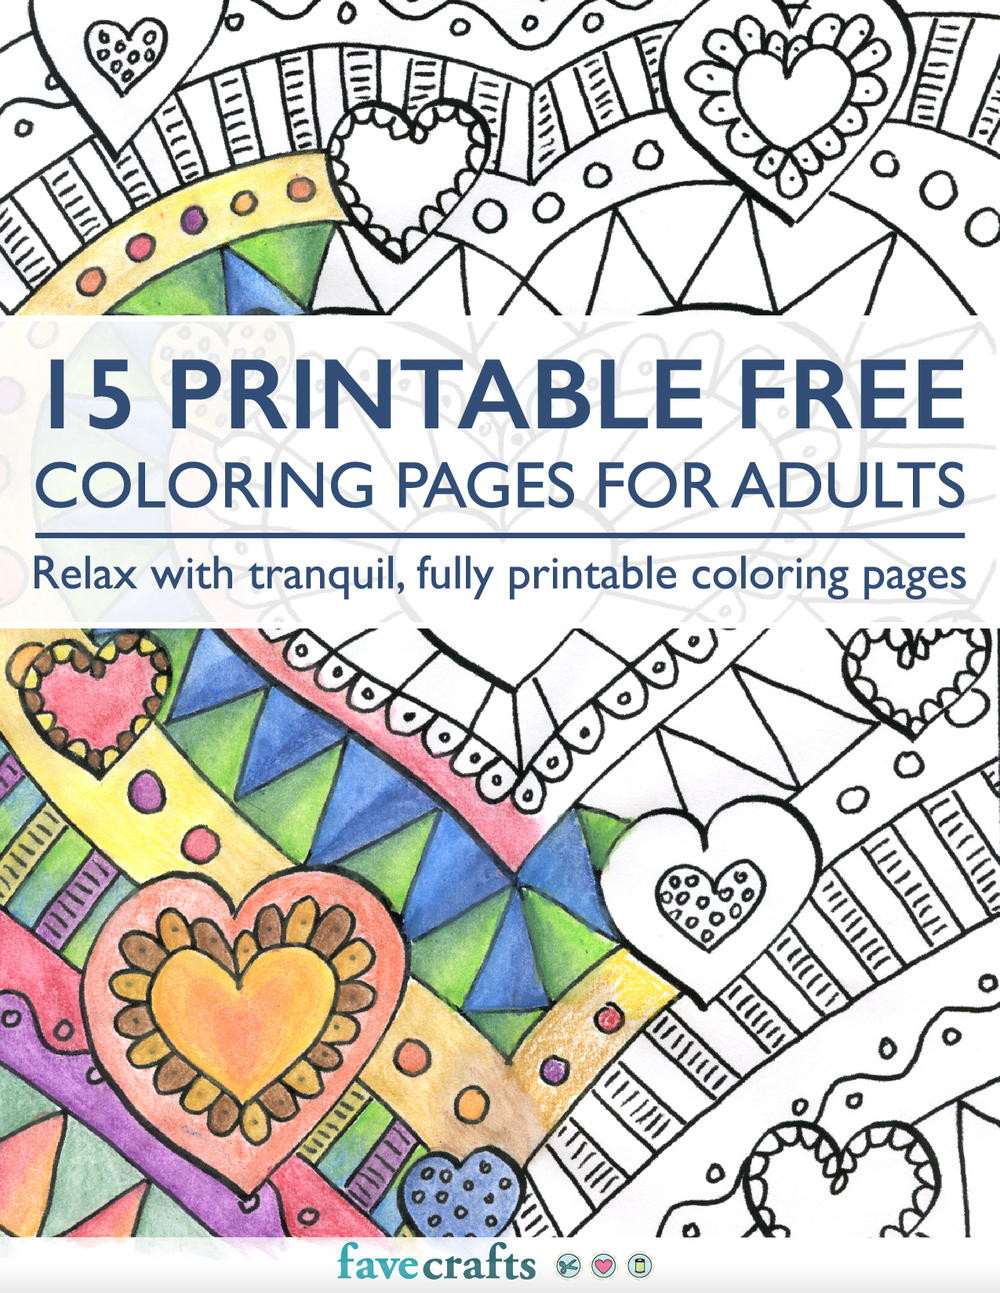 Coloring Books For Adults Printable
 15 Printable Free Coloring Pages for Adults [PDF